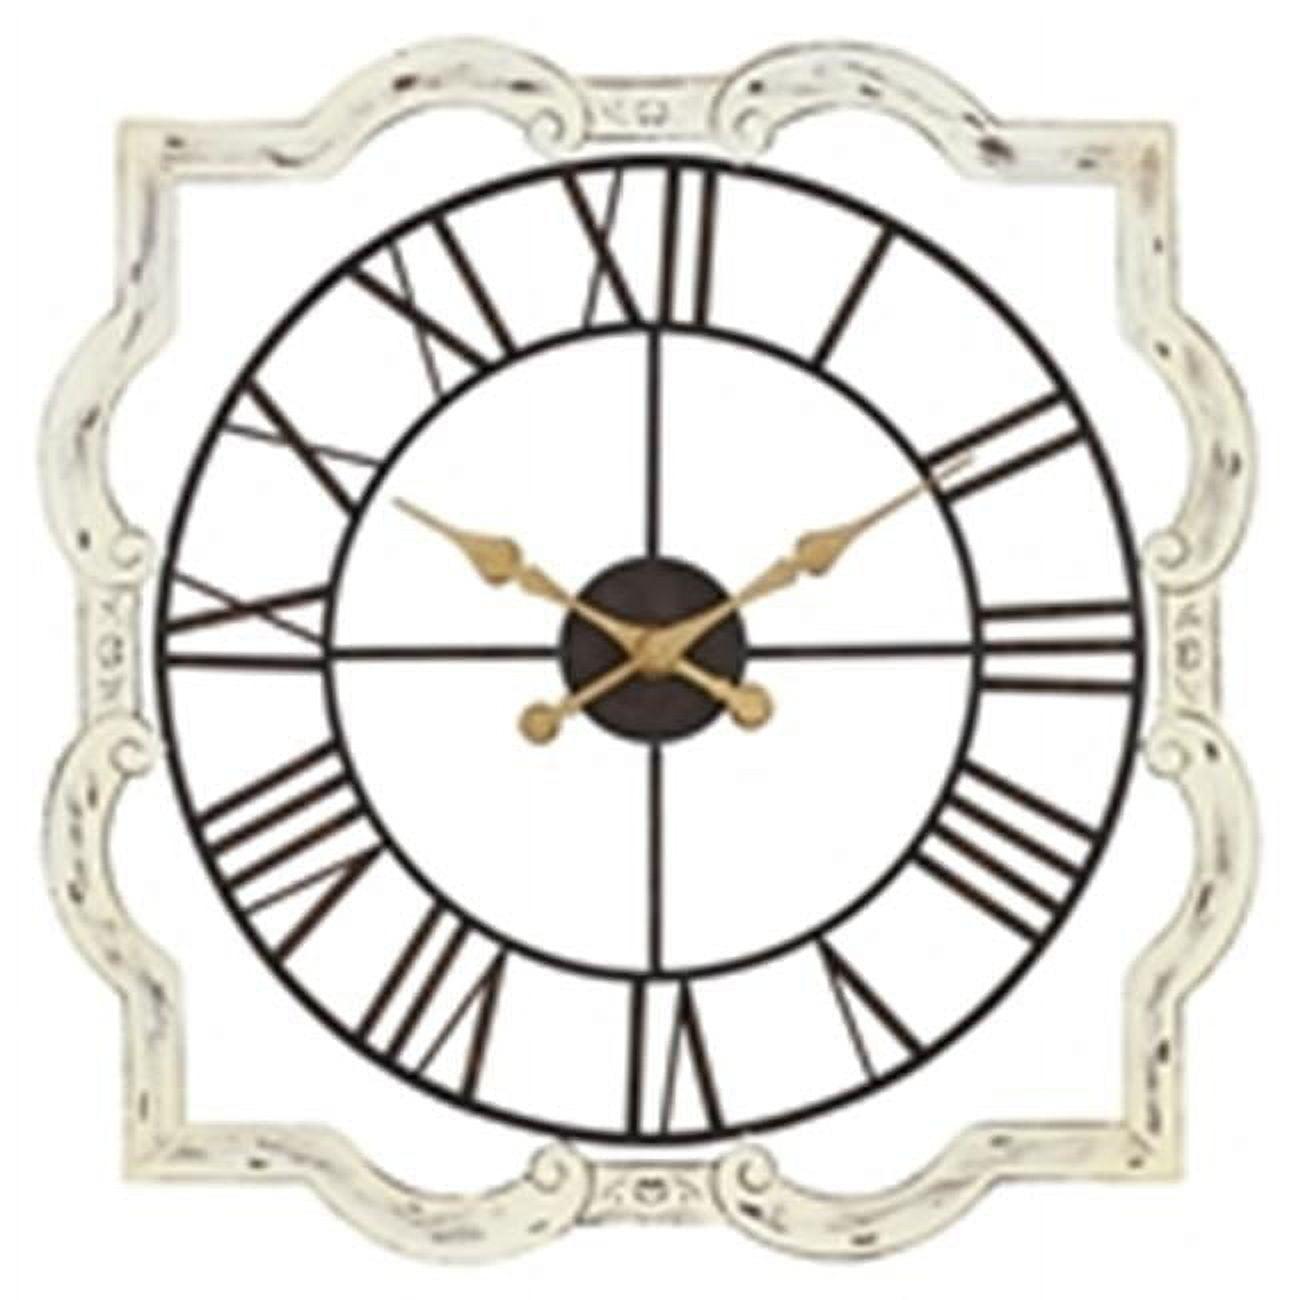 Eloise Oversized Distressed Off-White Iron Wall Clock